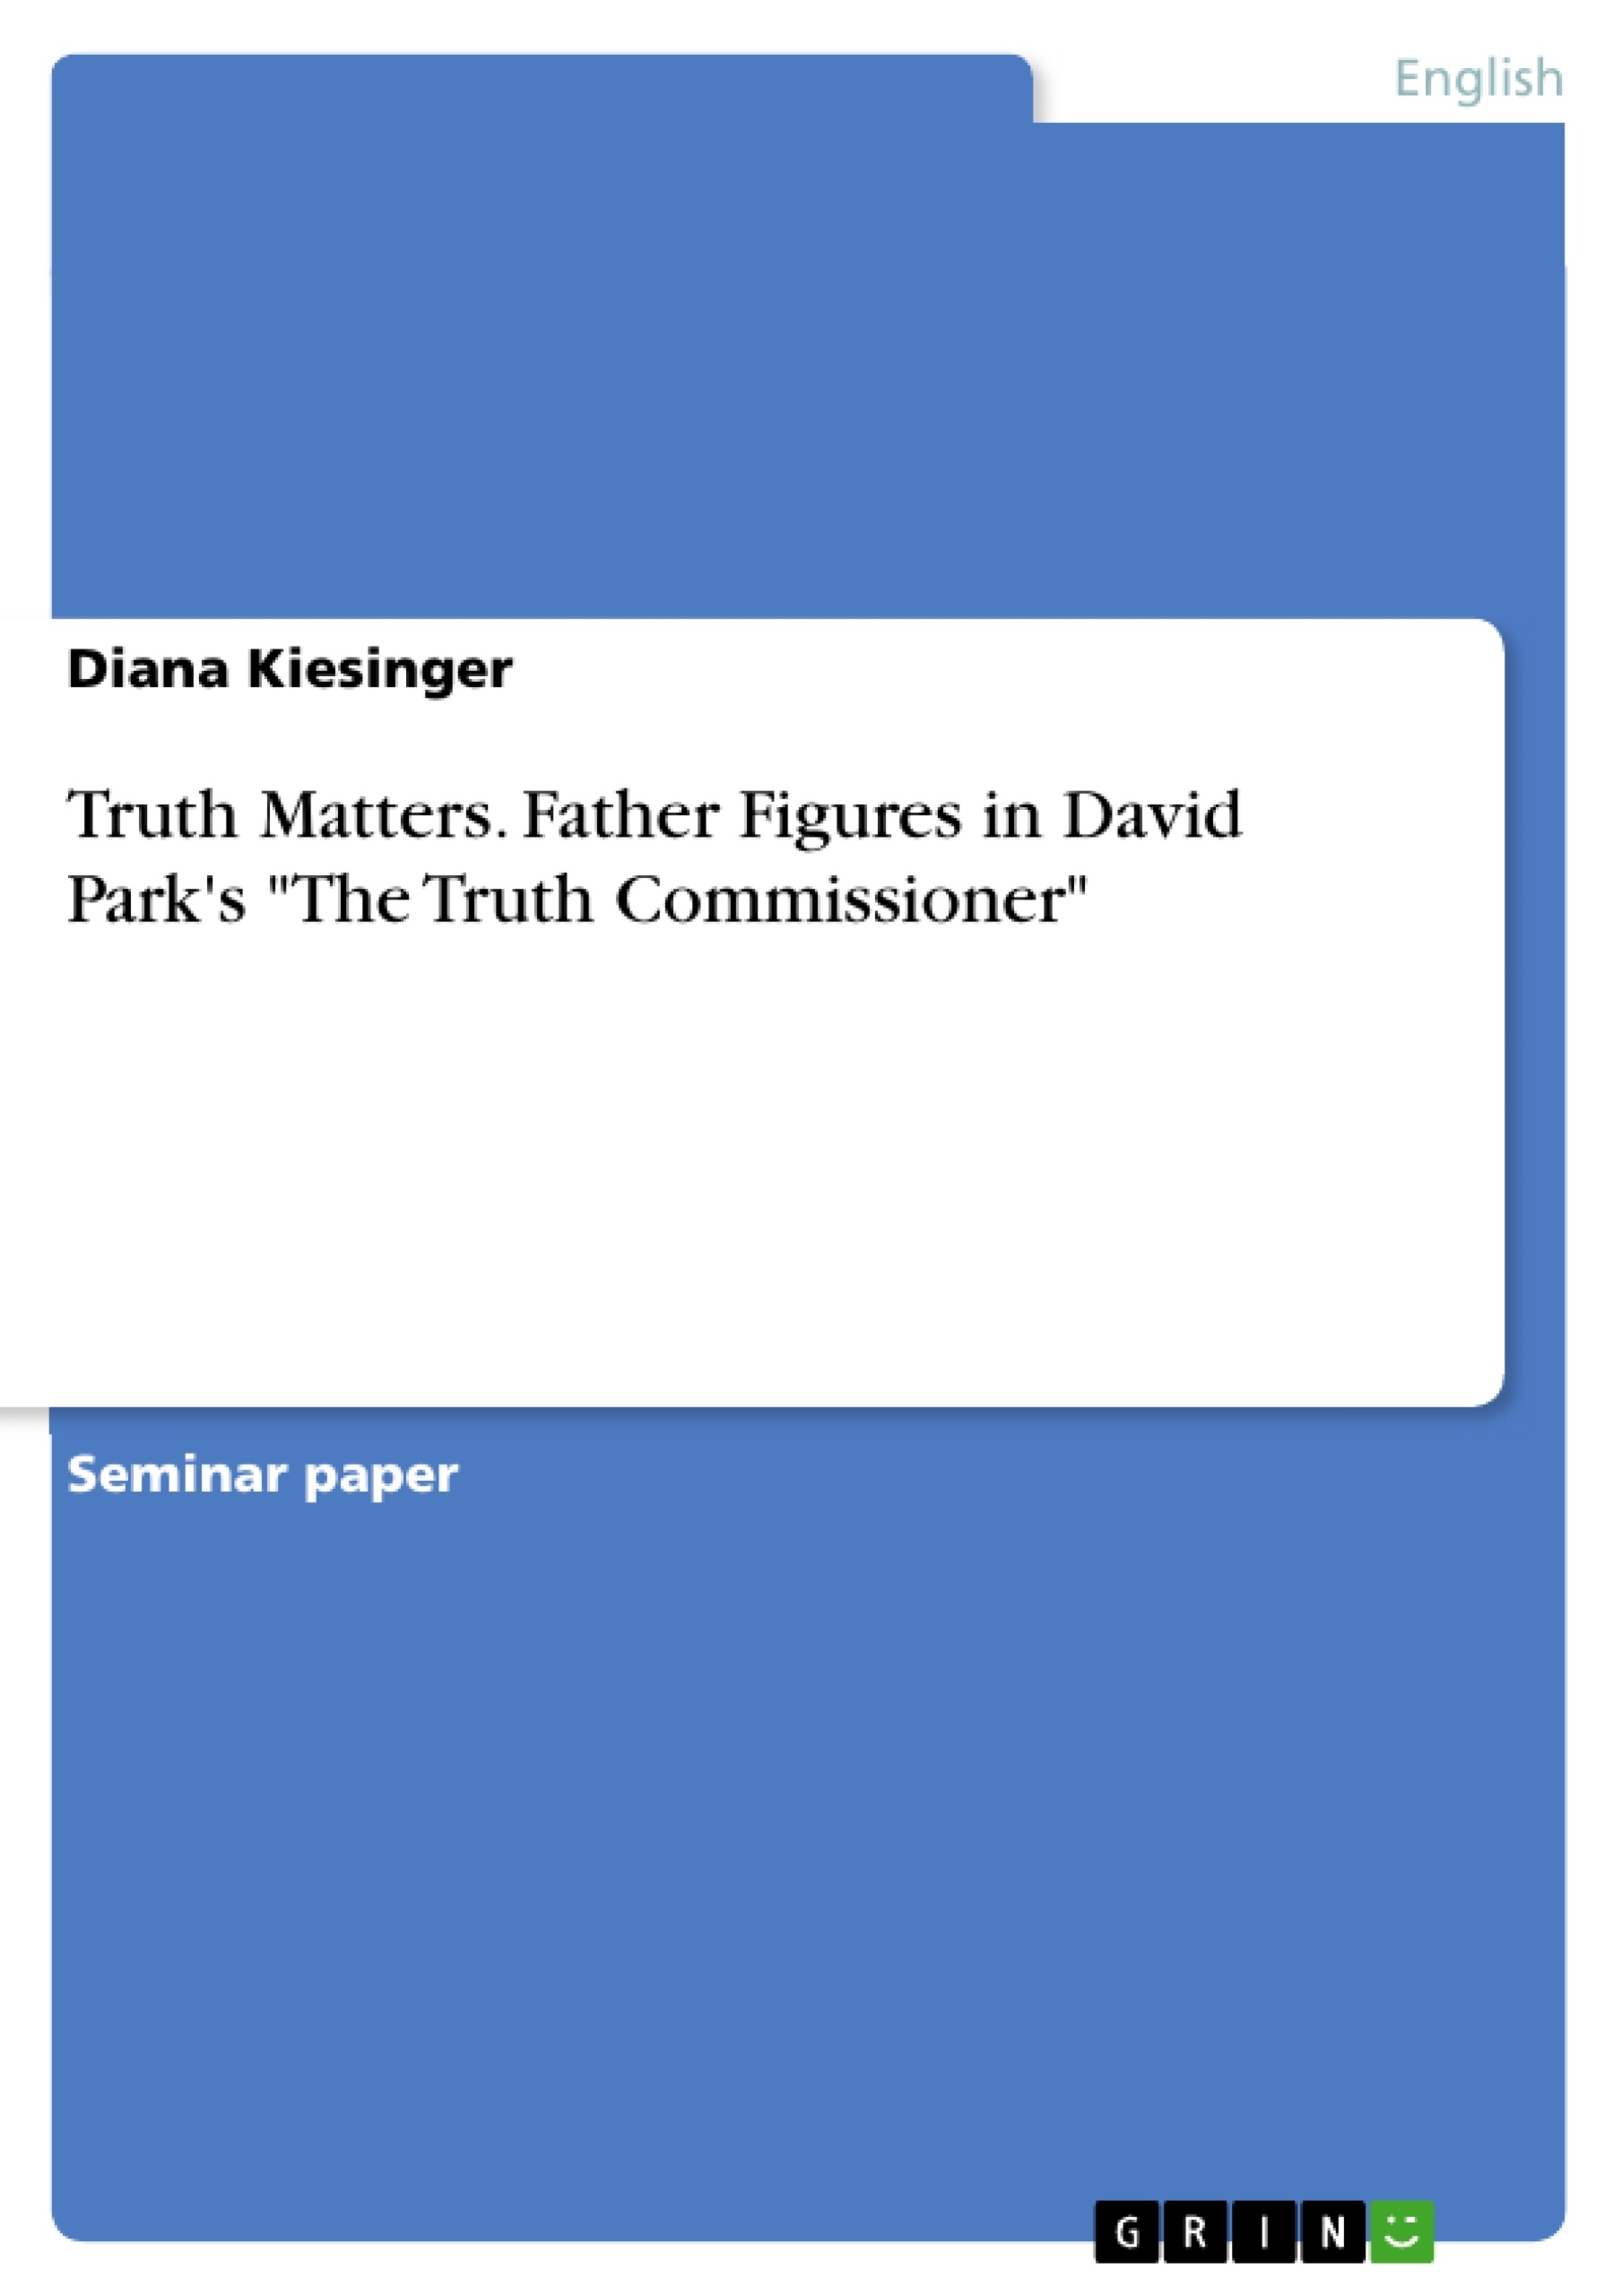 Título: Truth Matters. Father Figures in David Park's "The Truth Commissioner"